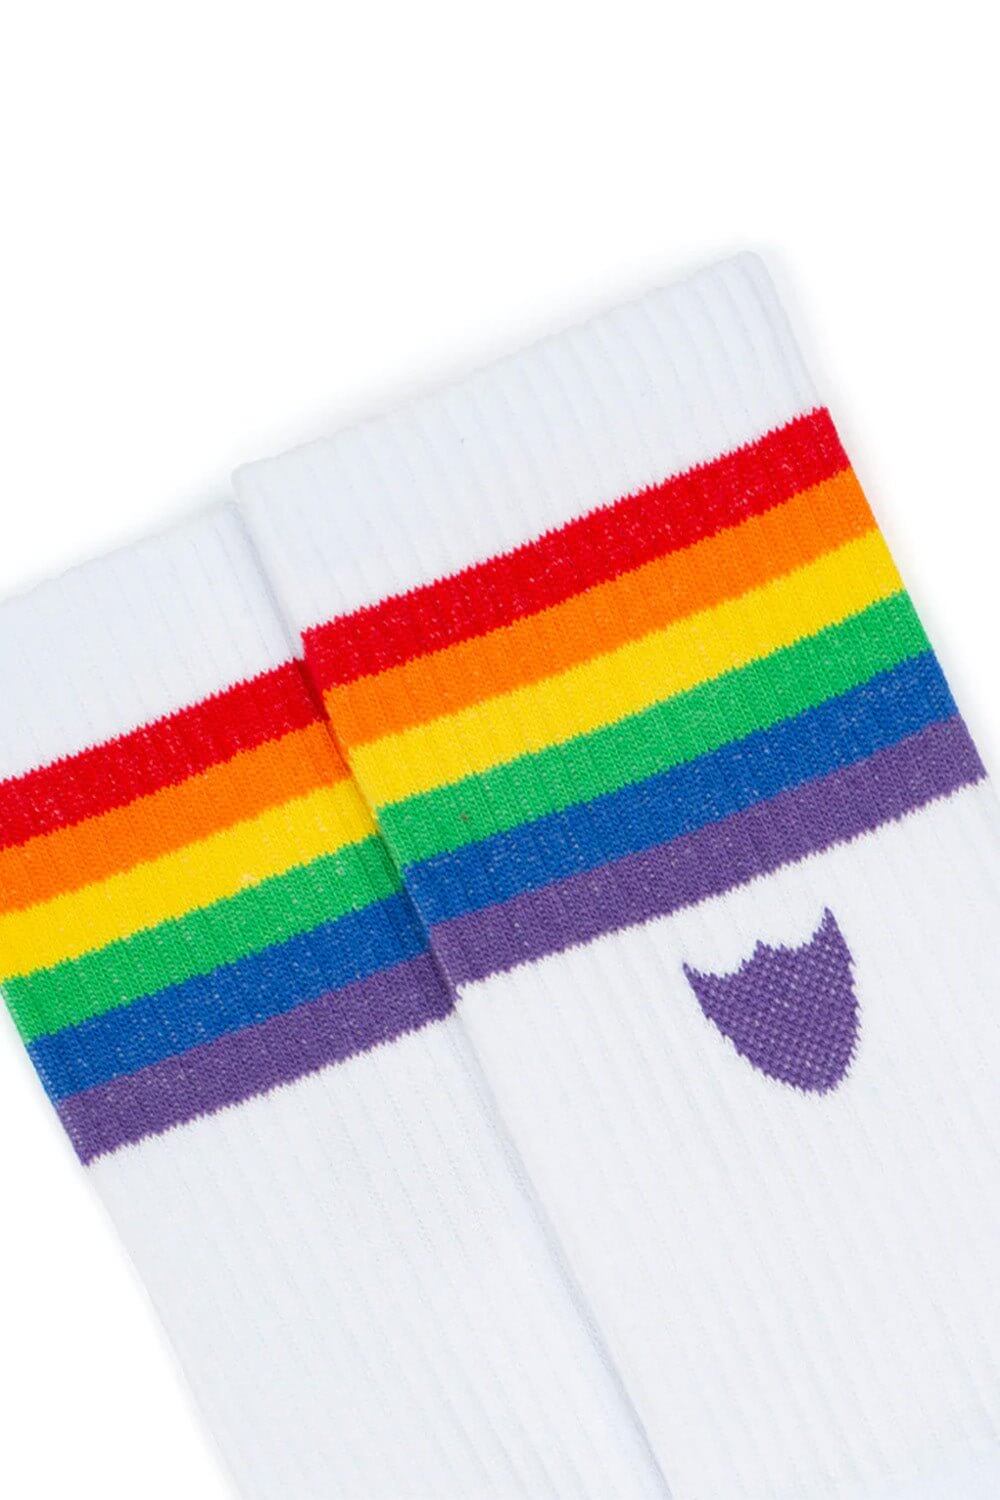 SHIELD RAINBOW WOMAN SOCKS Signature woman socks with Hollywood Trading Co script logo. 85% Cotton 10% Polyamide 5% Elastane. Made in Italy HTC LOS ANGELES